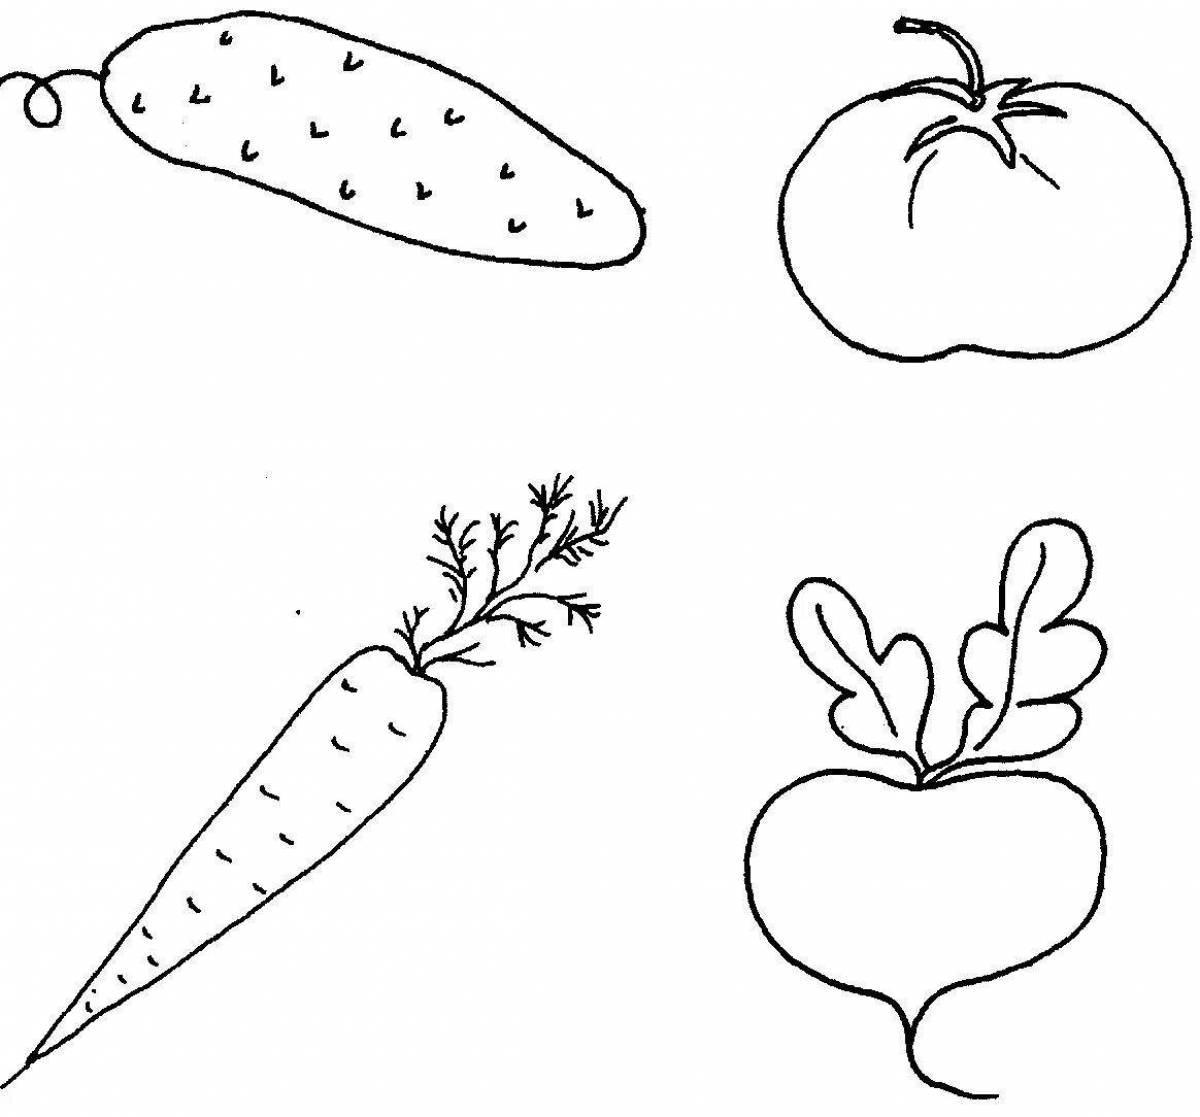 Fascinating vegetable coloring book for 3-4 year olds